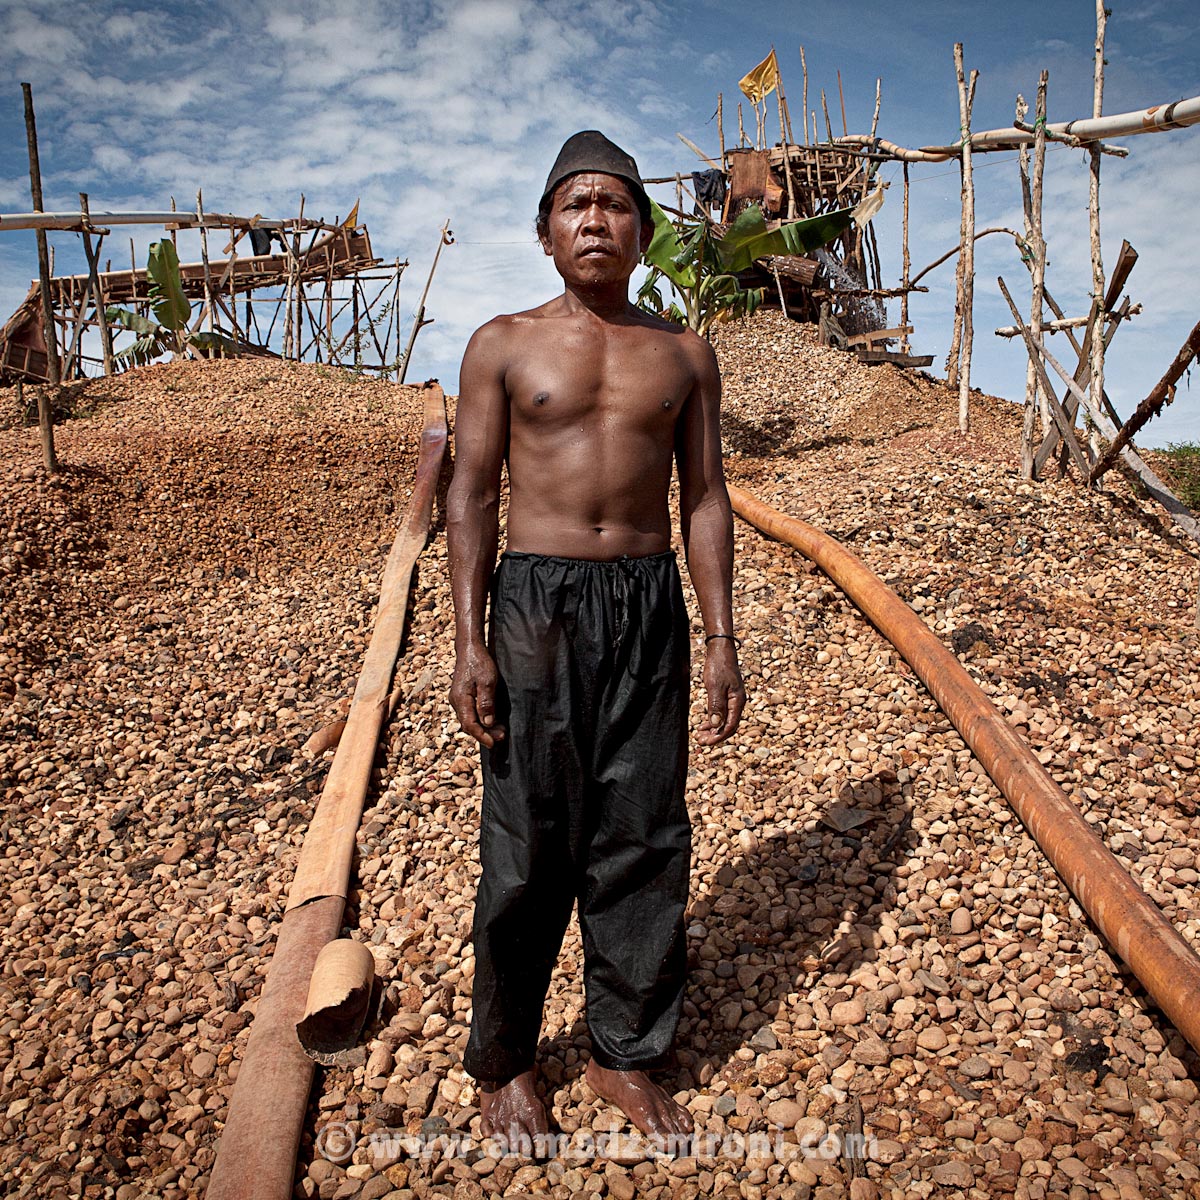 Samsul, 48 yo work as traditional miner for 15 years.